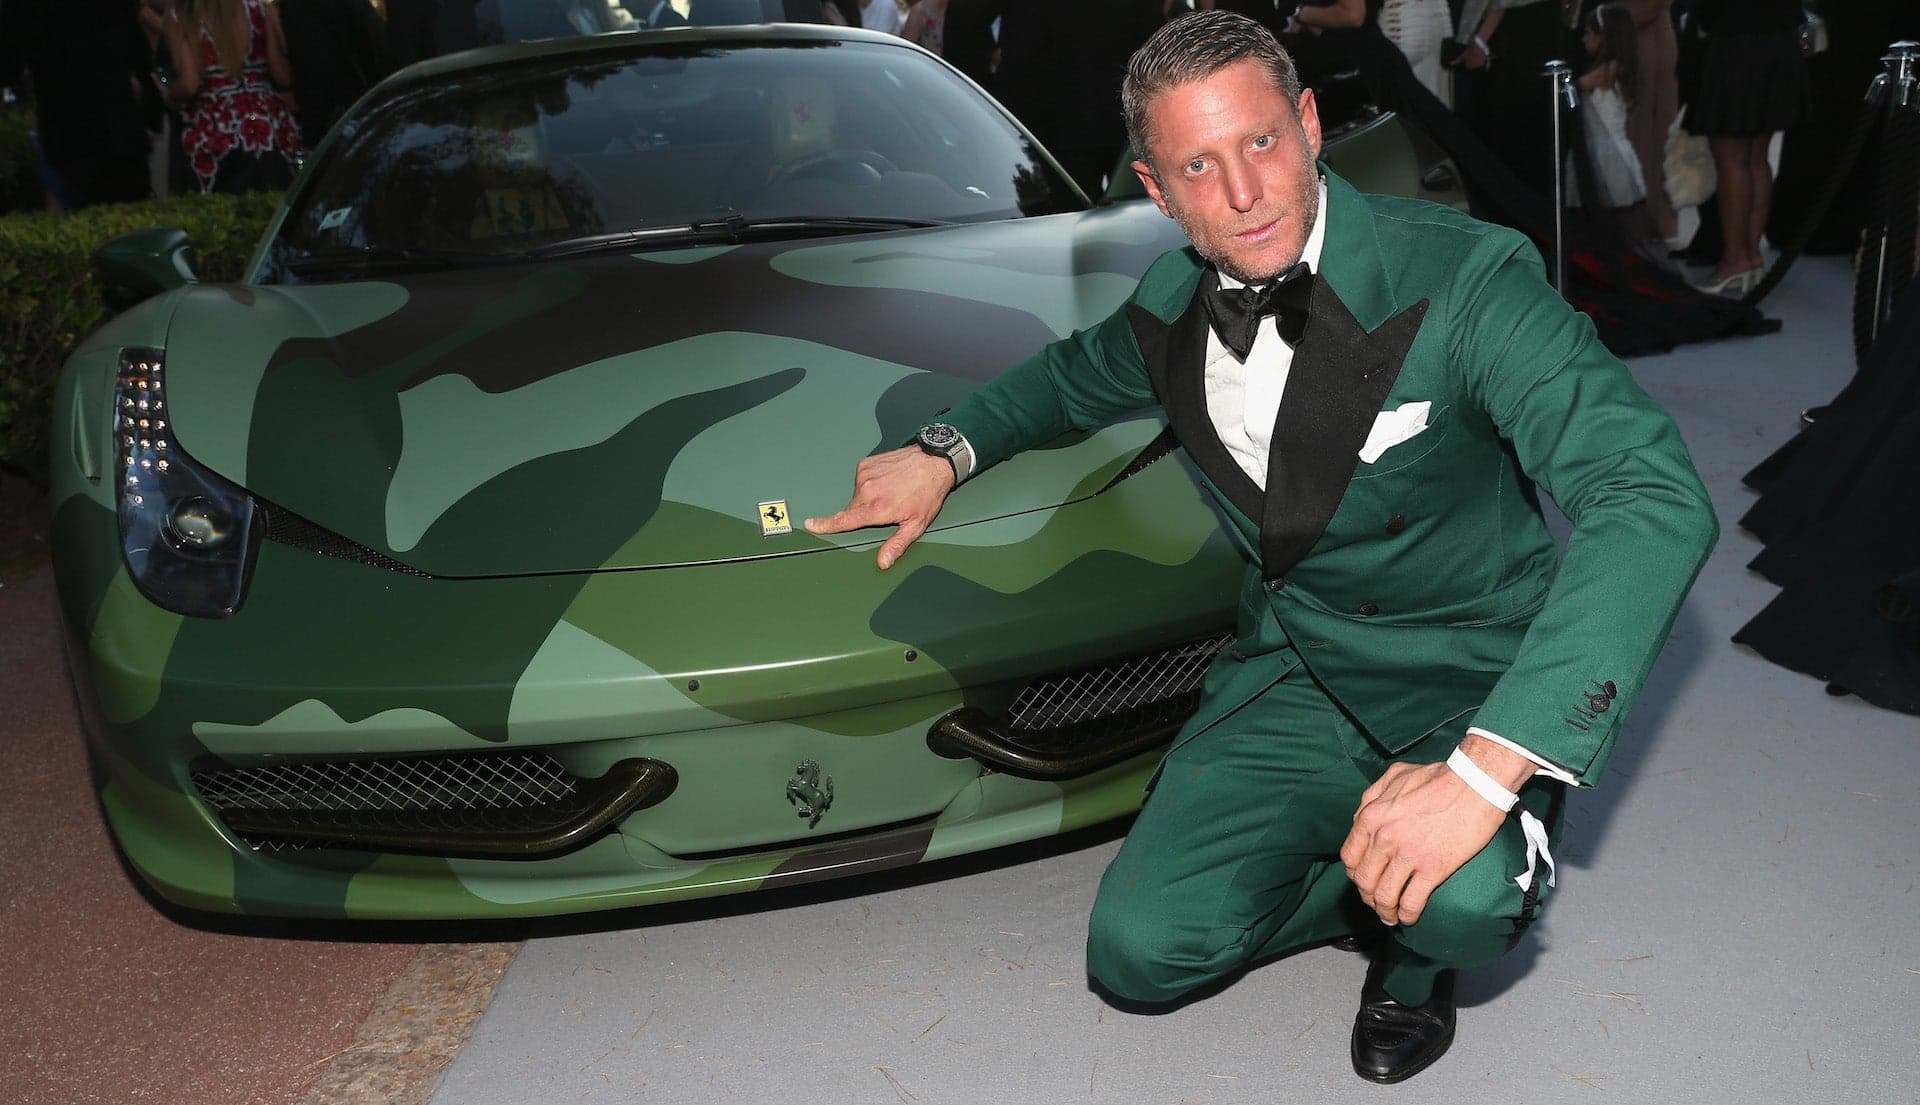 Prosecutor Drops Charges Against Reported Cocaine and Hooker Fan, Fiat Heir Lapo Elkann